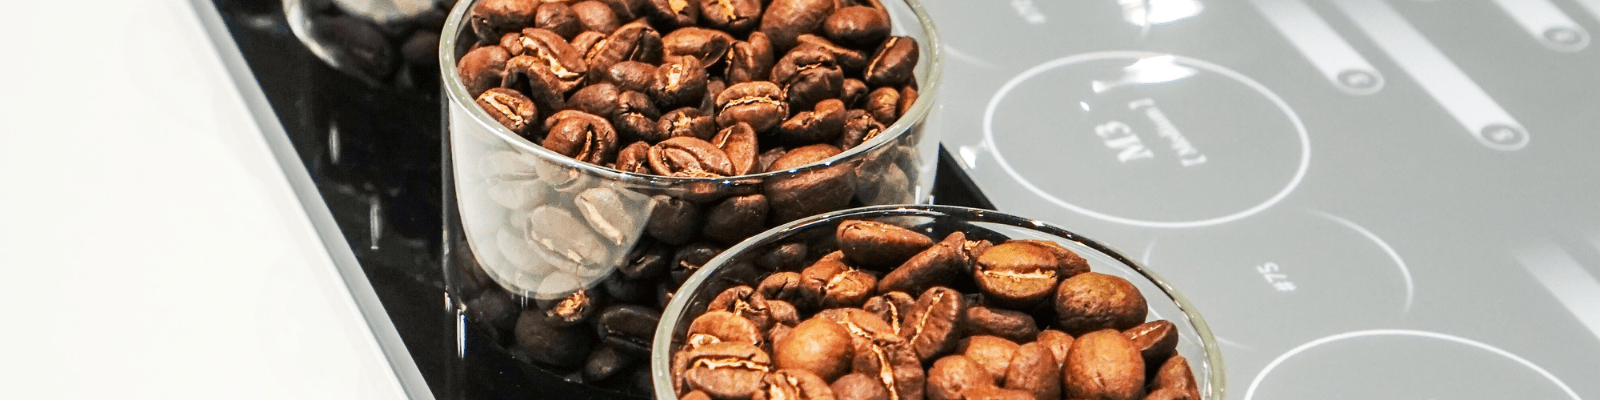 coffee beans in a group head for espresso